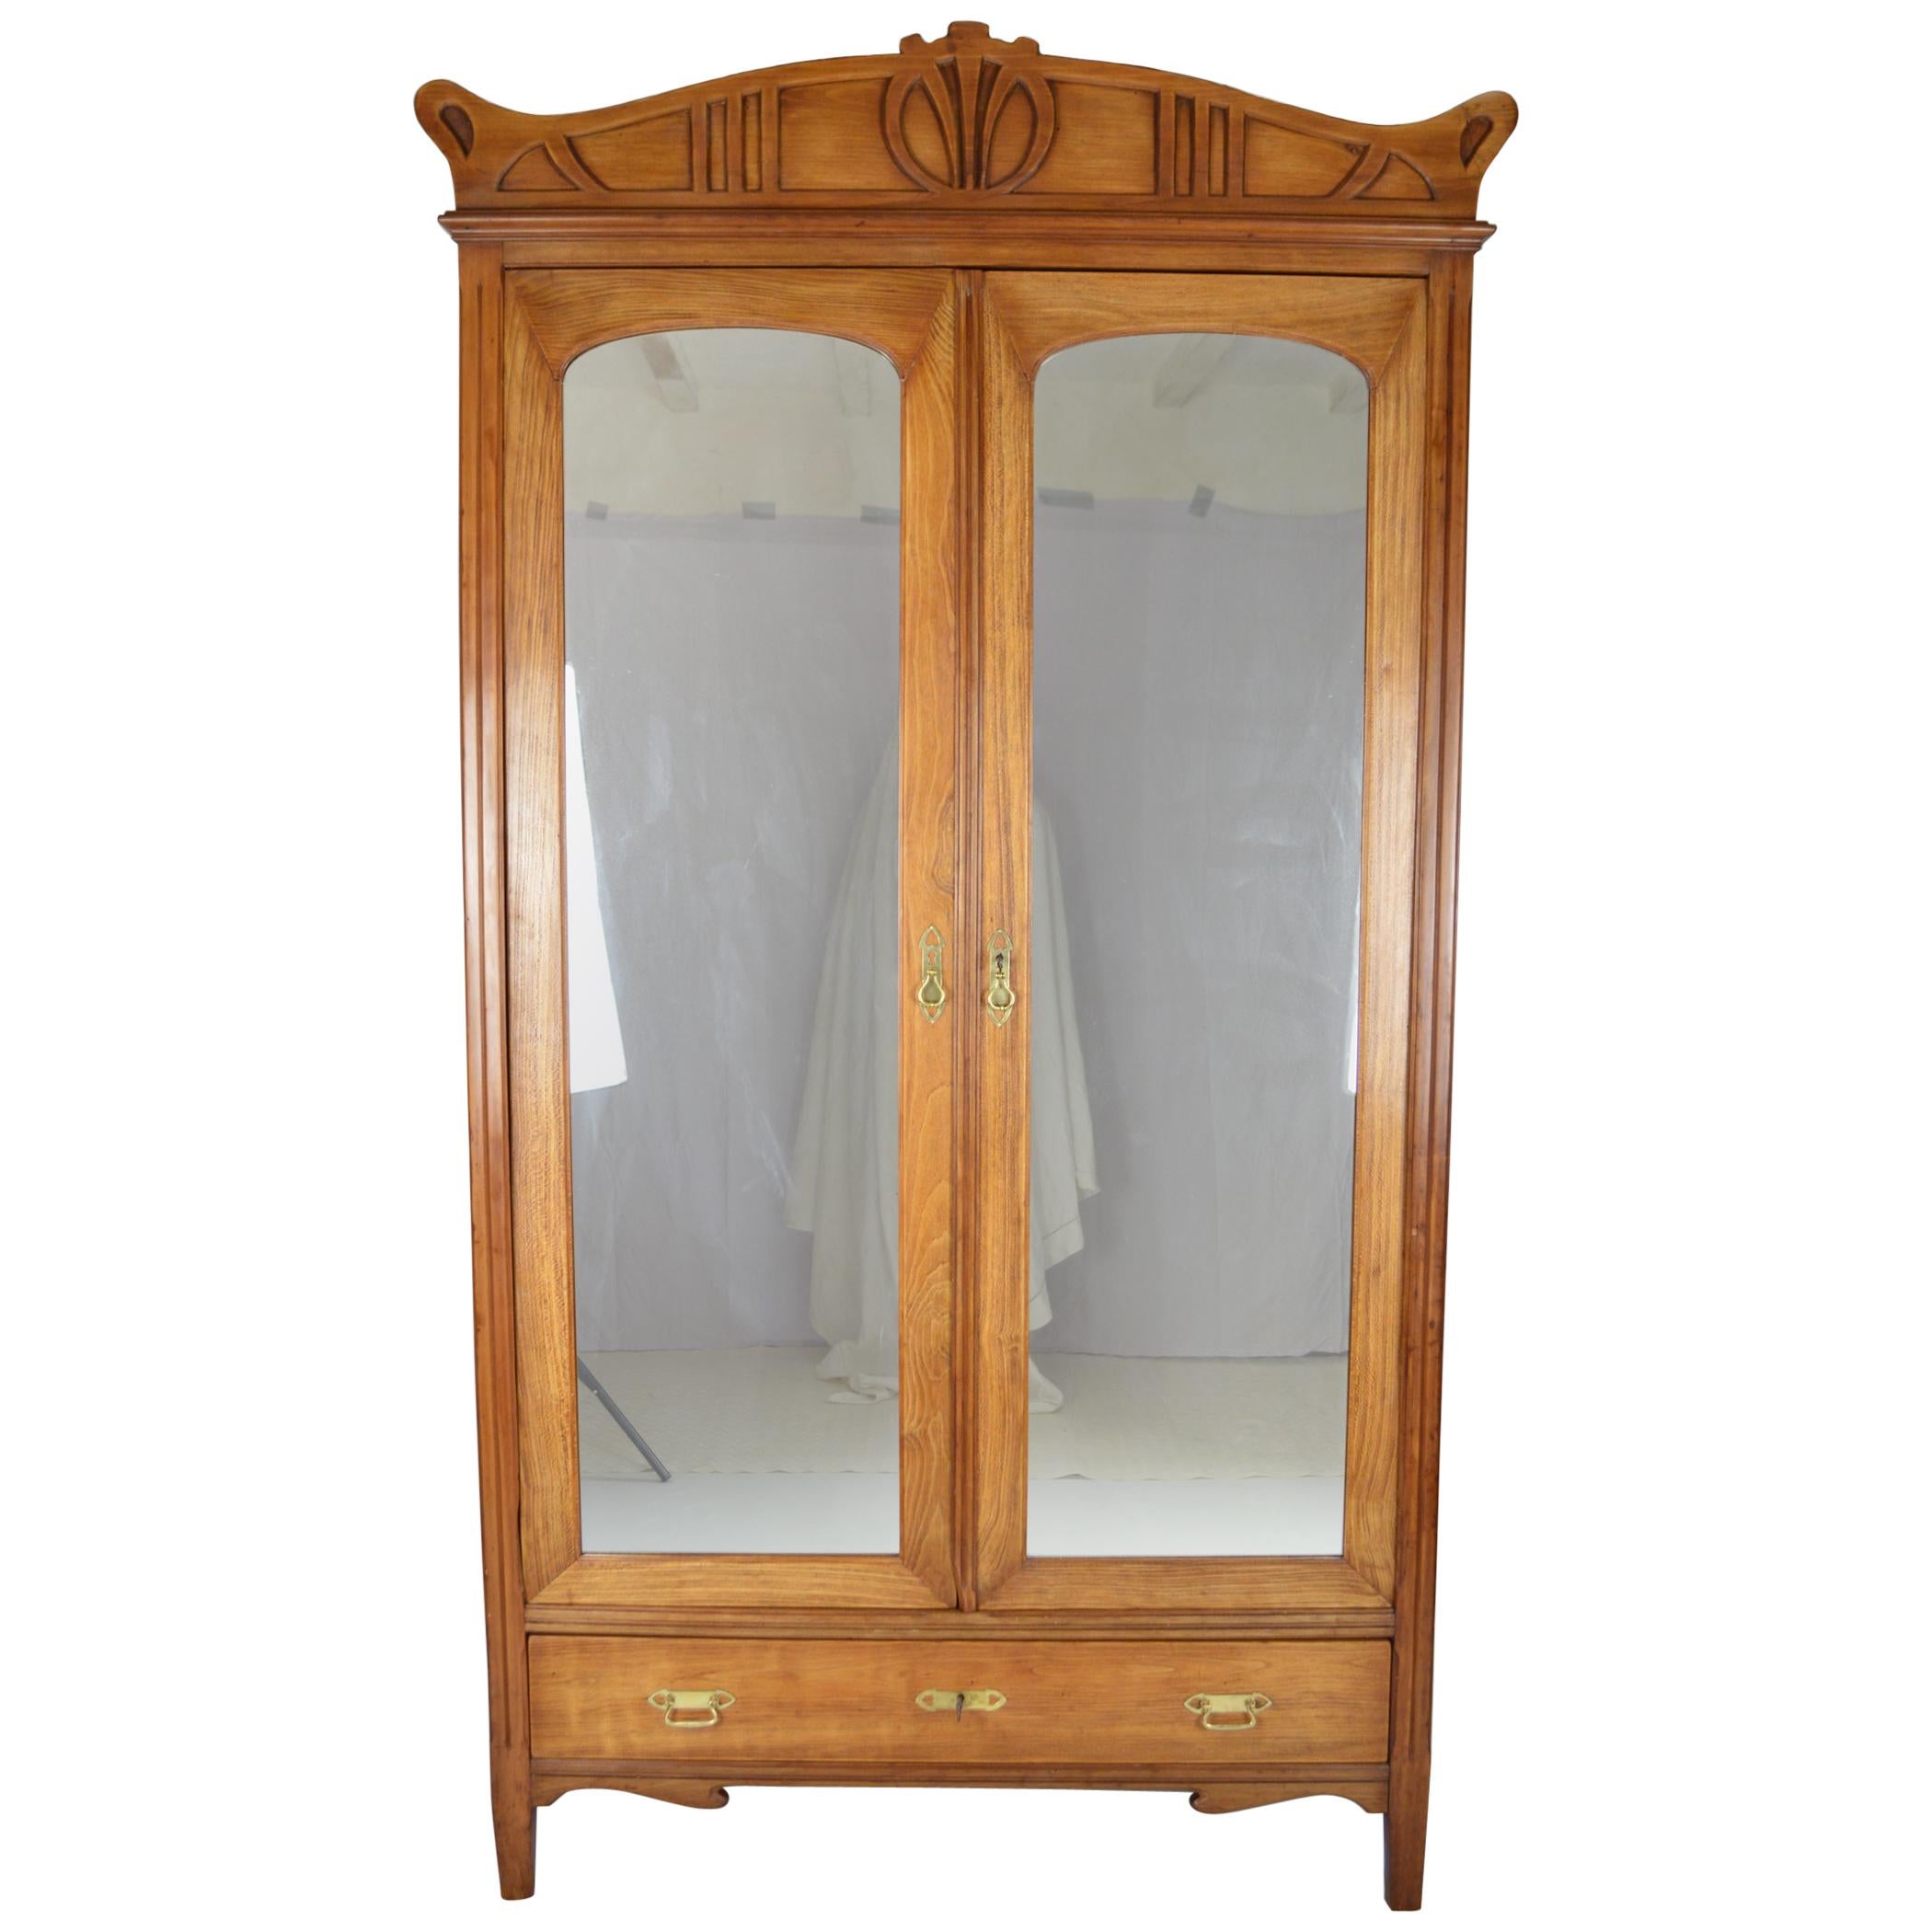 Art Nouveau Wardrobe / Armoire in Carved Fruit Wood, France, circa 1910